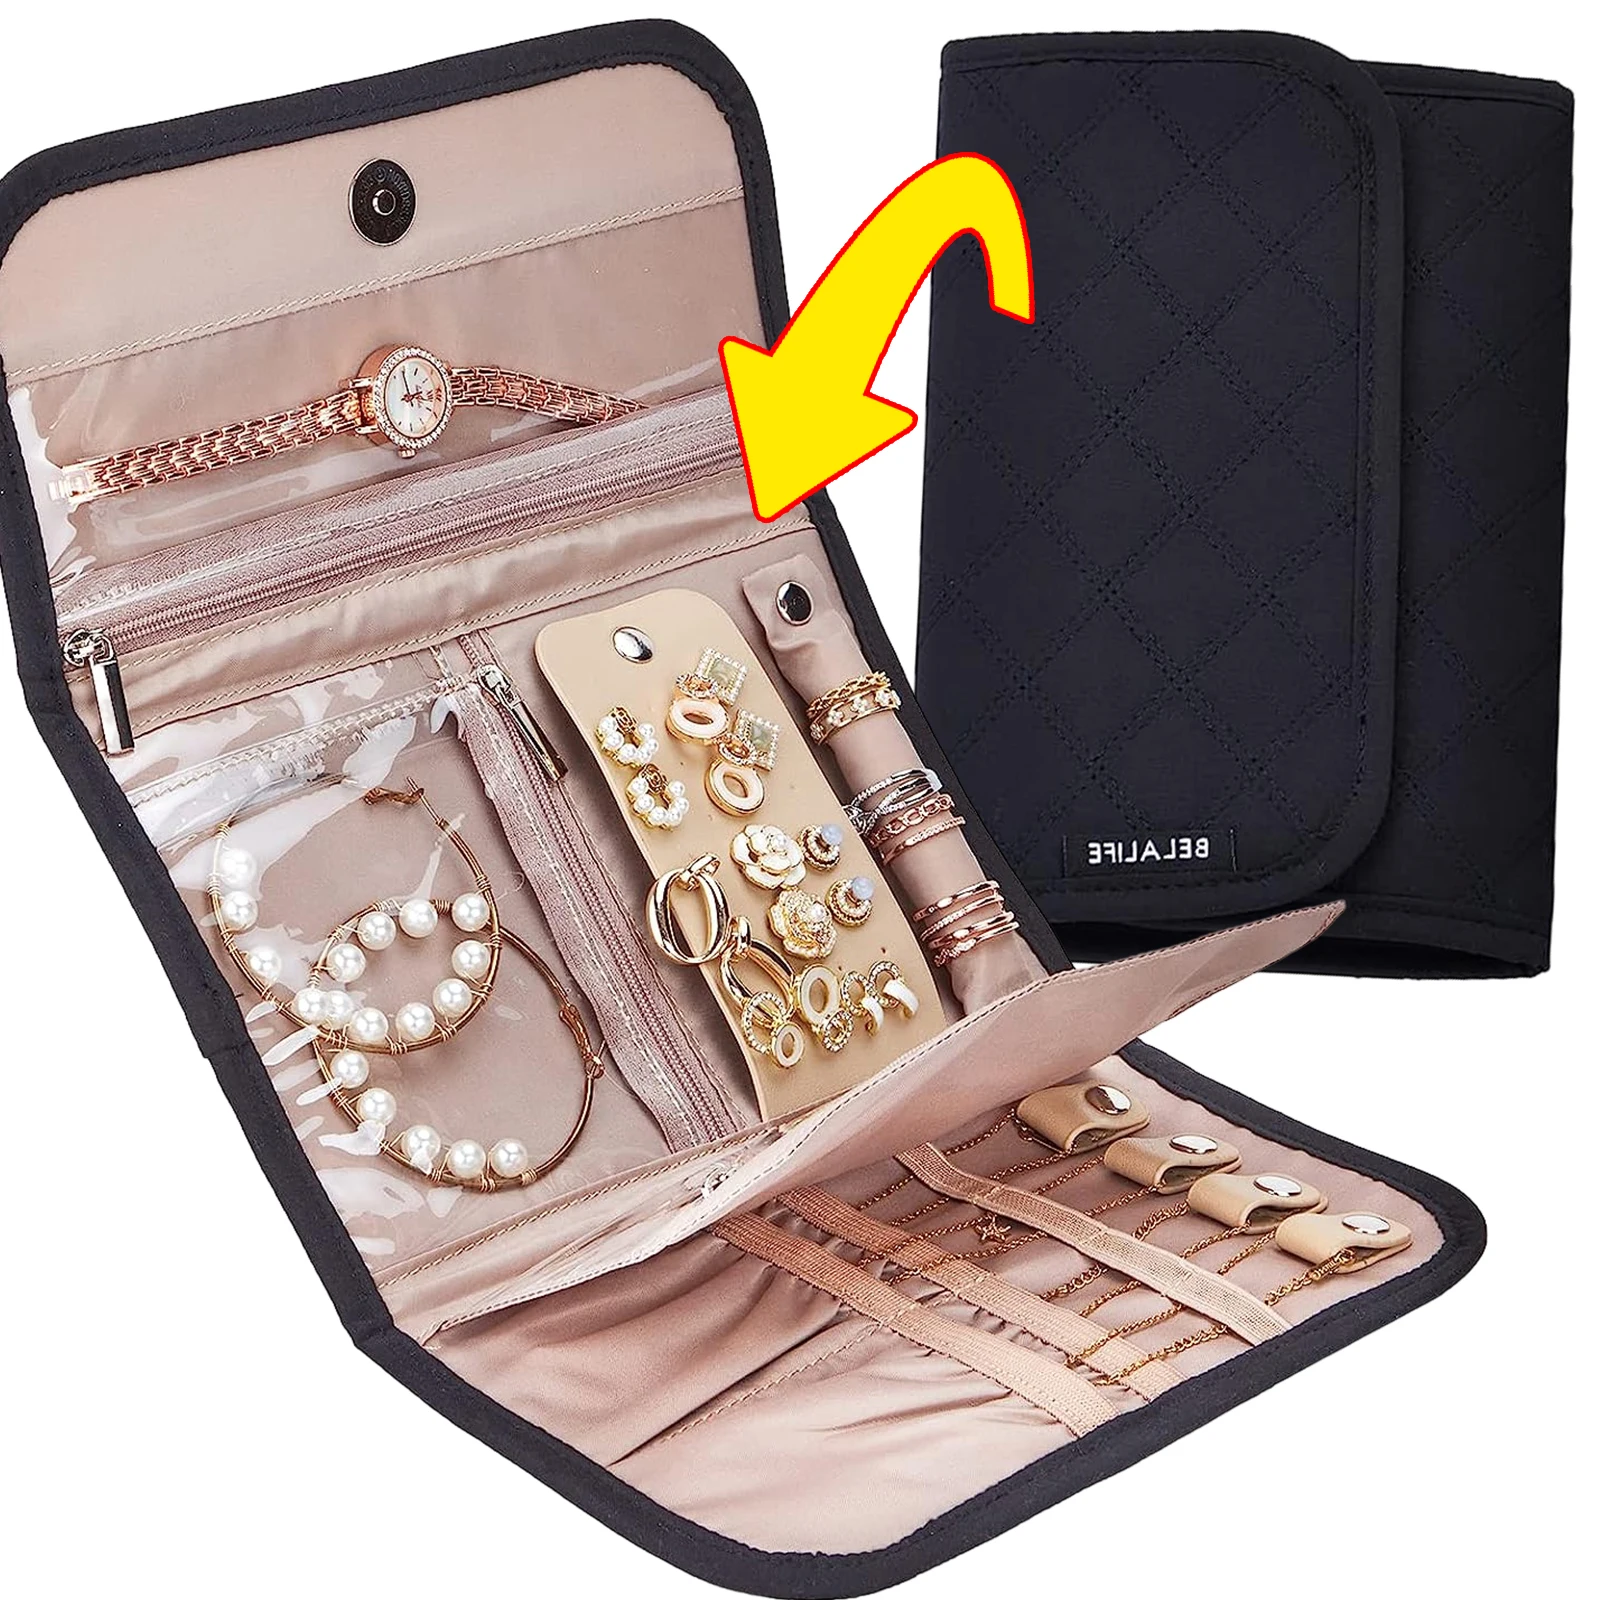 Roll Foldable Jewelry Case Travel Jewelry Organizer Portable for Journey Earrings Rings Diamond Necklaces Brooches Storage Bag key rings titanium alloy keychain for car keys wholesale bulk outdoor portable mini keyring for men and women